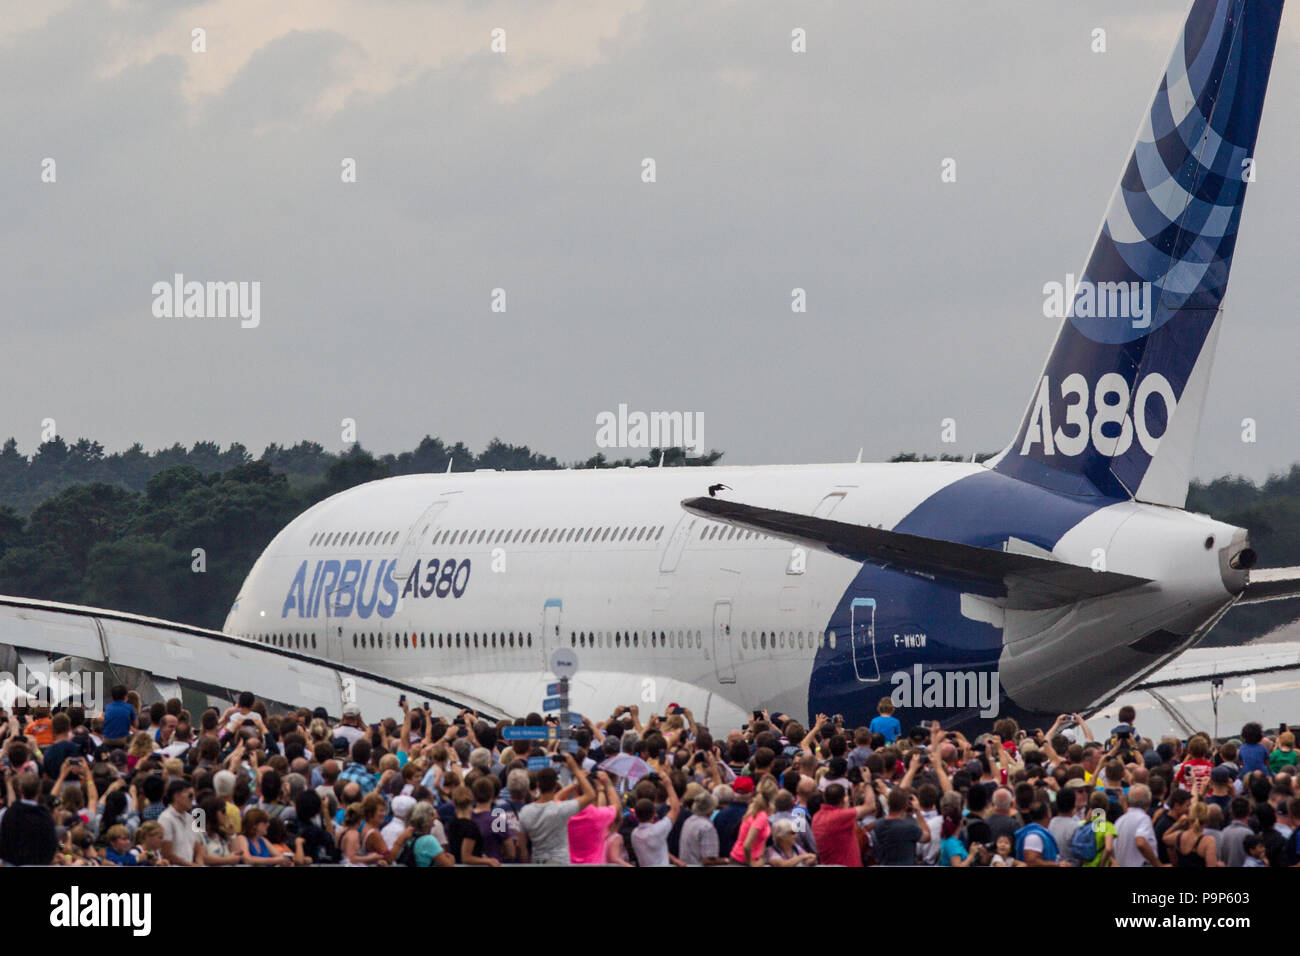 Visitors to the airshow watch the Airbus A380 civil airplane at the Farnborough International Airshow, UK Stock Photo